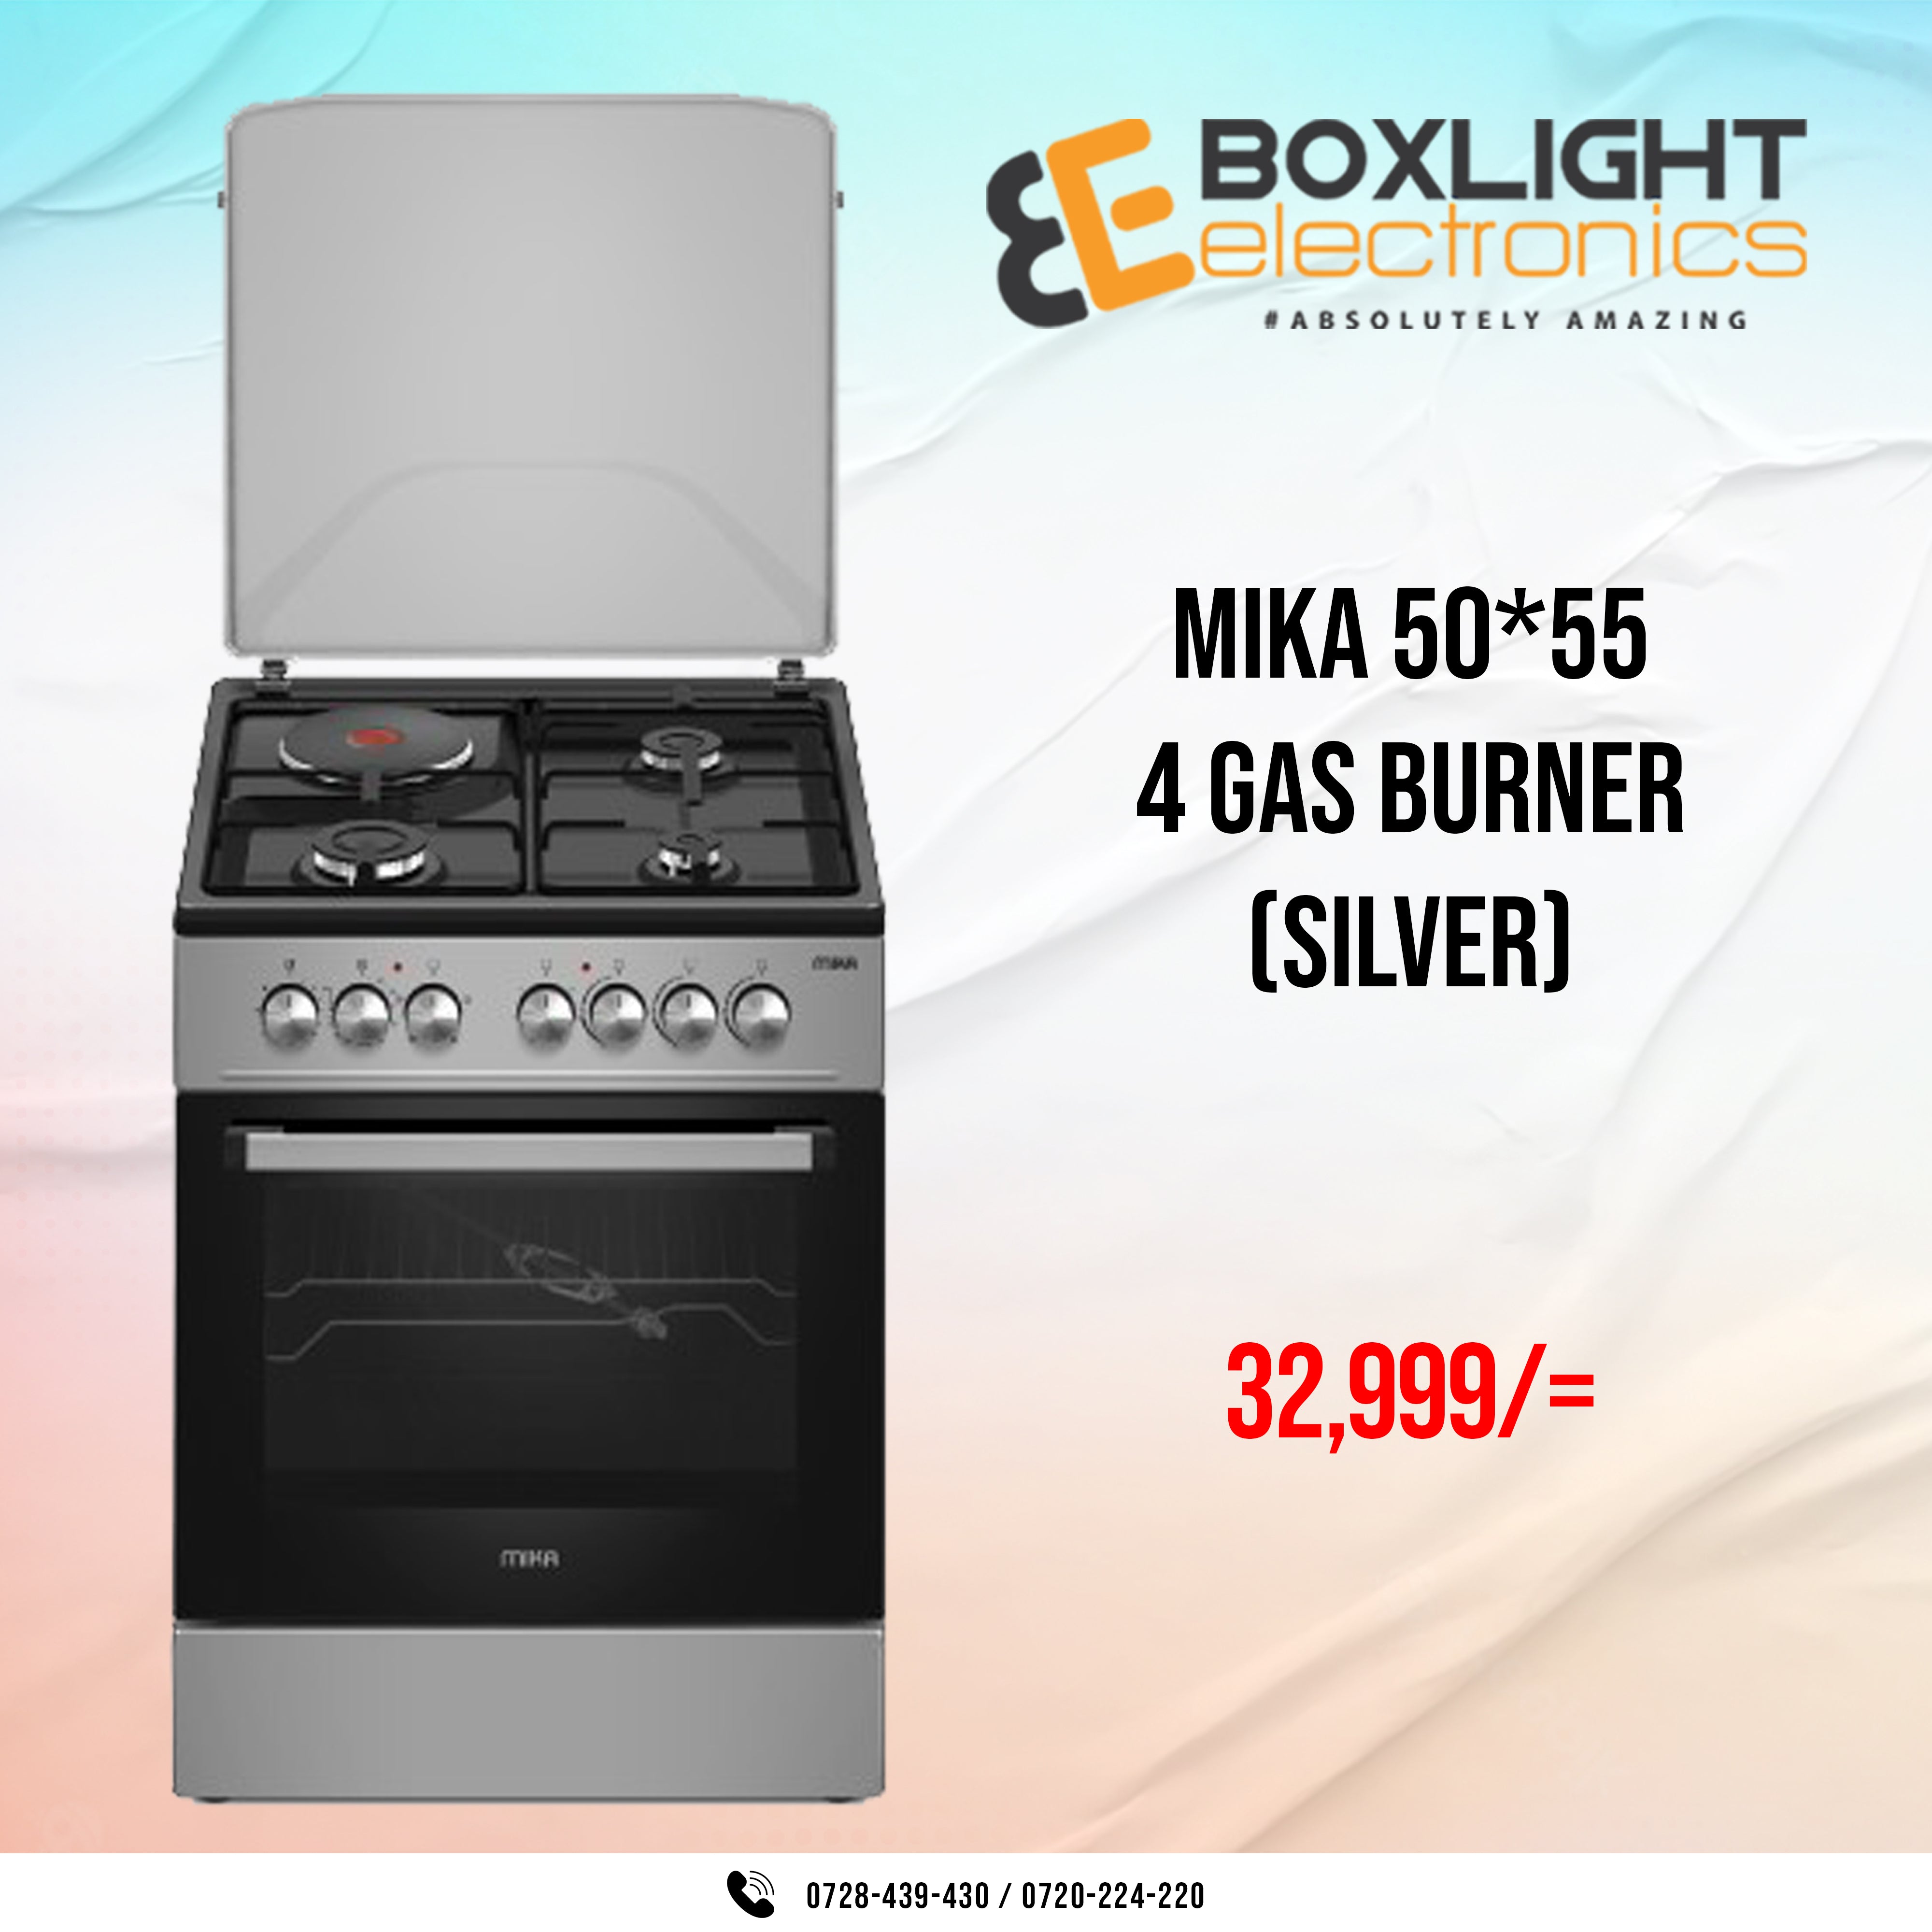 Mika Standing Cooker, 50cm x 60 cm, 3 Gas Burner + 1 Electric Plate & Electric Oven 4F, Silver - MST5060U31PSB